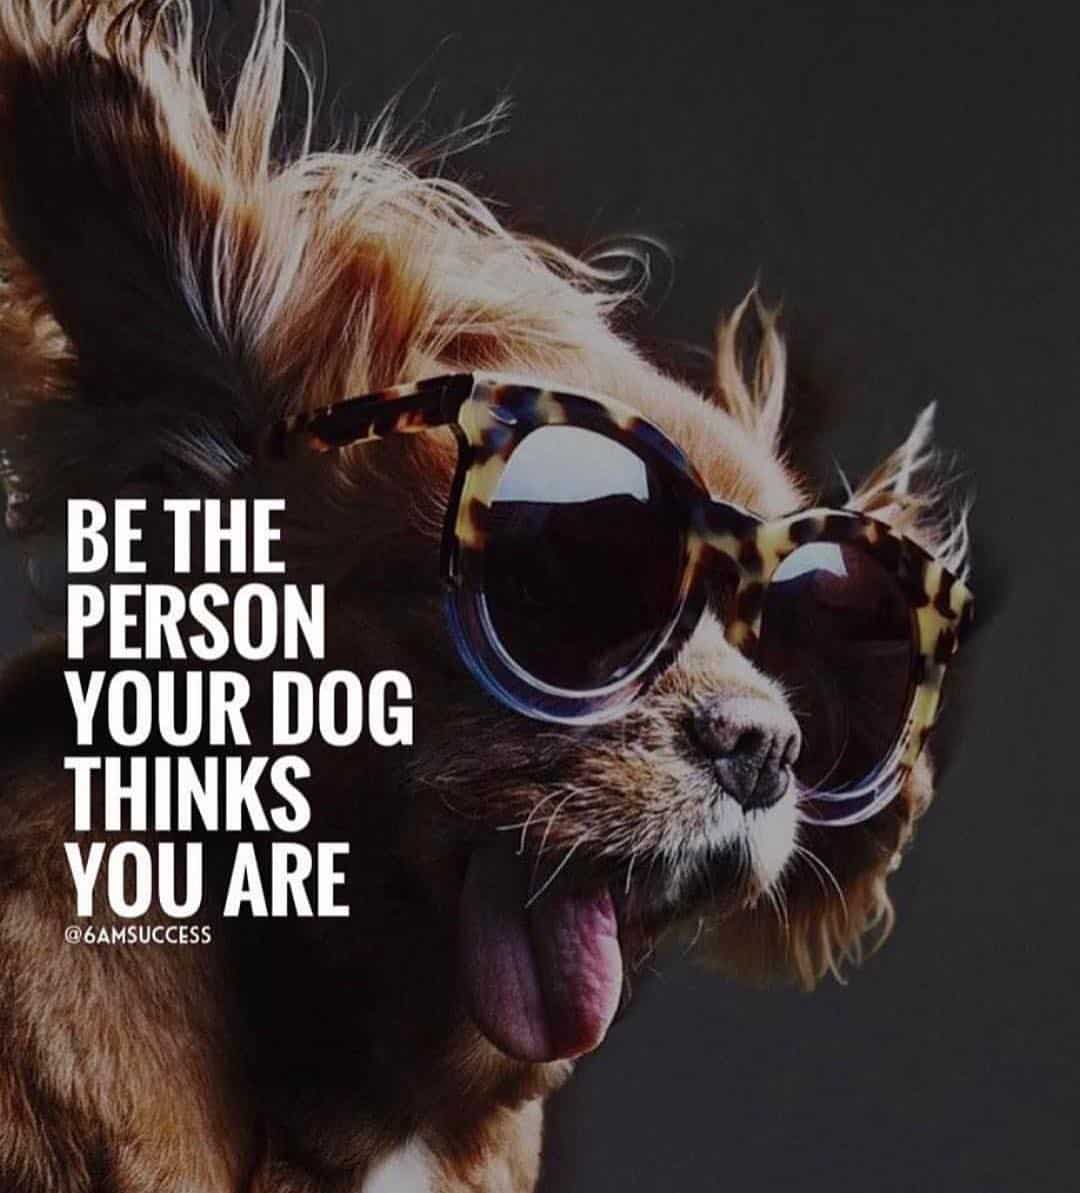 “Be the person your dog thinks you are.” - quote